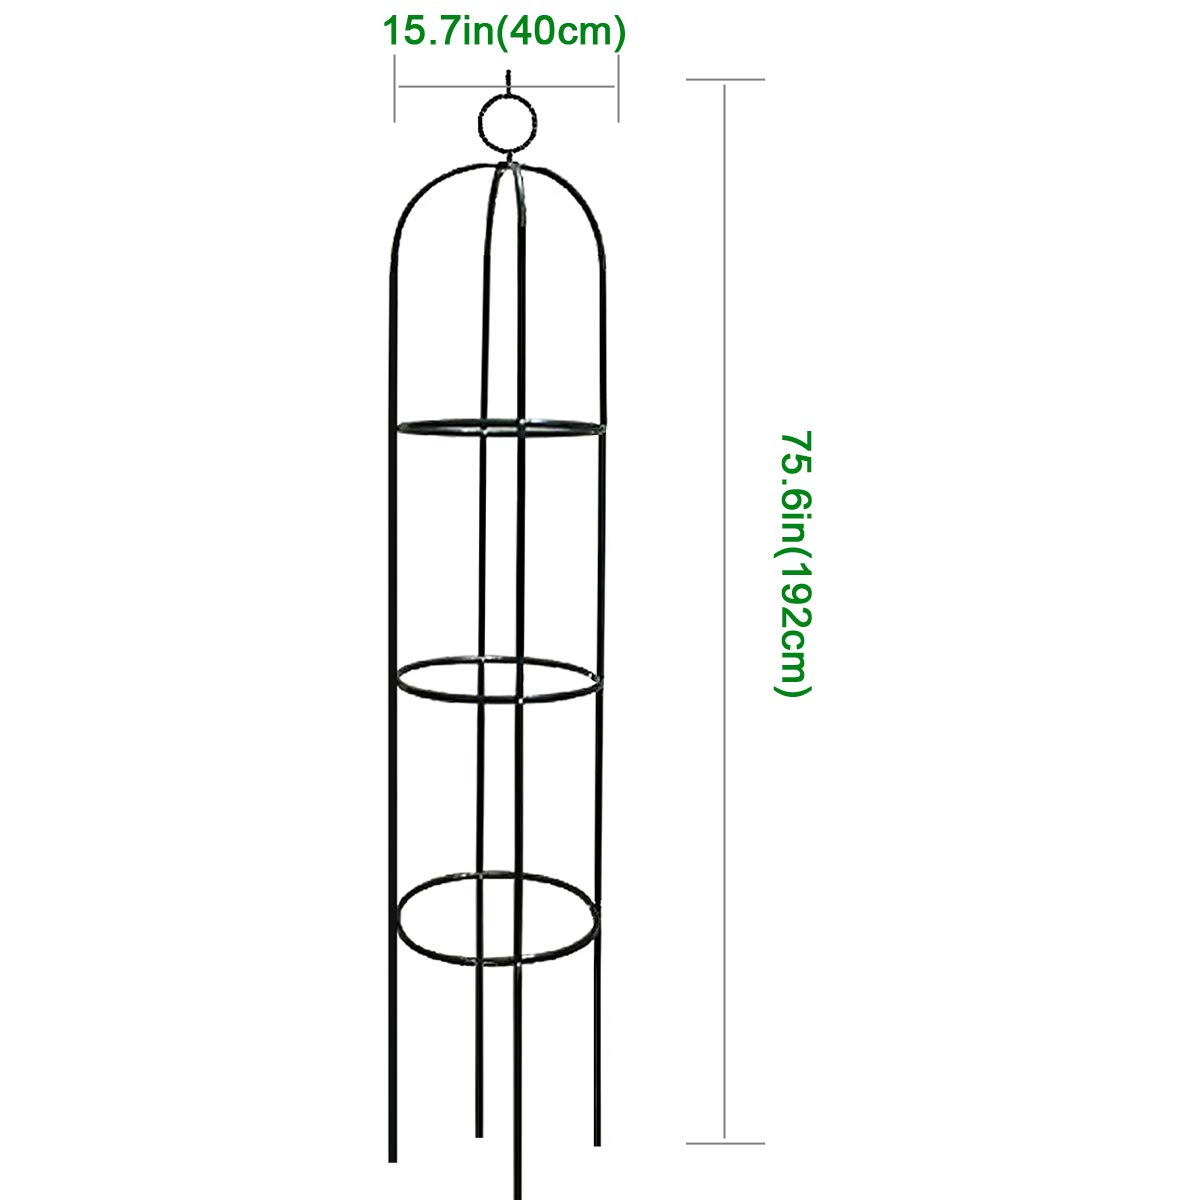 Tower Obelisk Garden Trellis 100% Metal 6.3 Feet Tall Plant Support for Climbing Vines and Flowers Stands,Black Green Lightweight Plant Tower